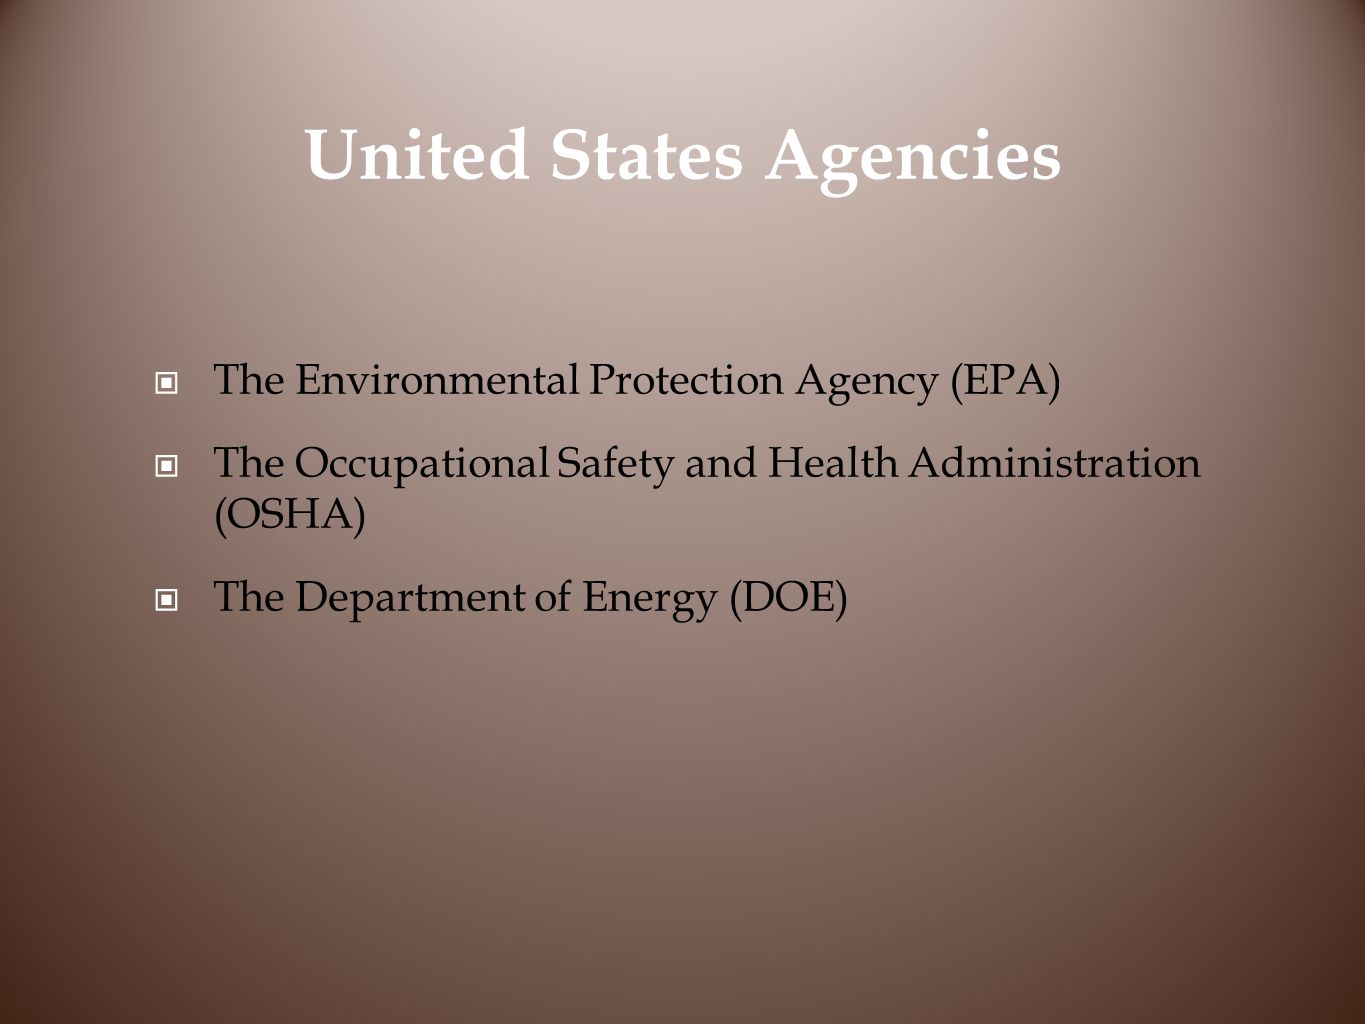 United States Agencies The Environmental Protection Agency (EPA) The Occupational Safety and Health Administration (OSHA) The Department of Energy (DOE)